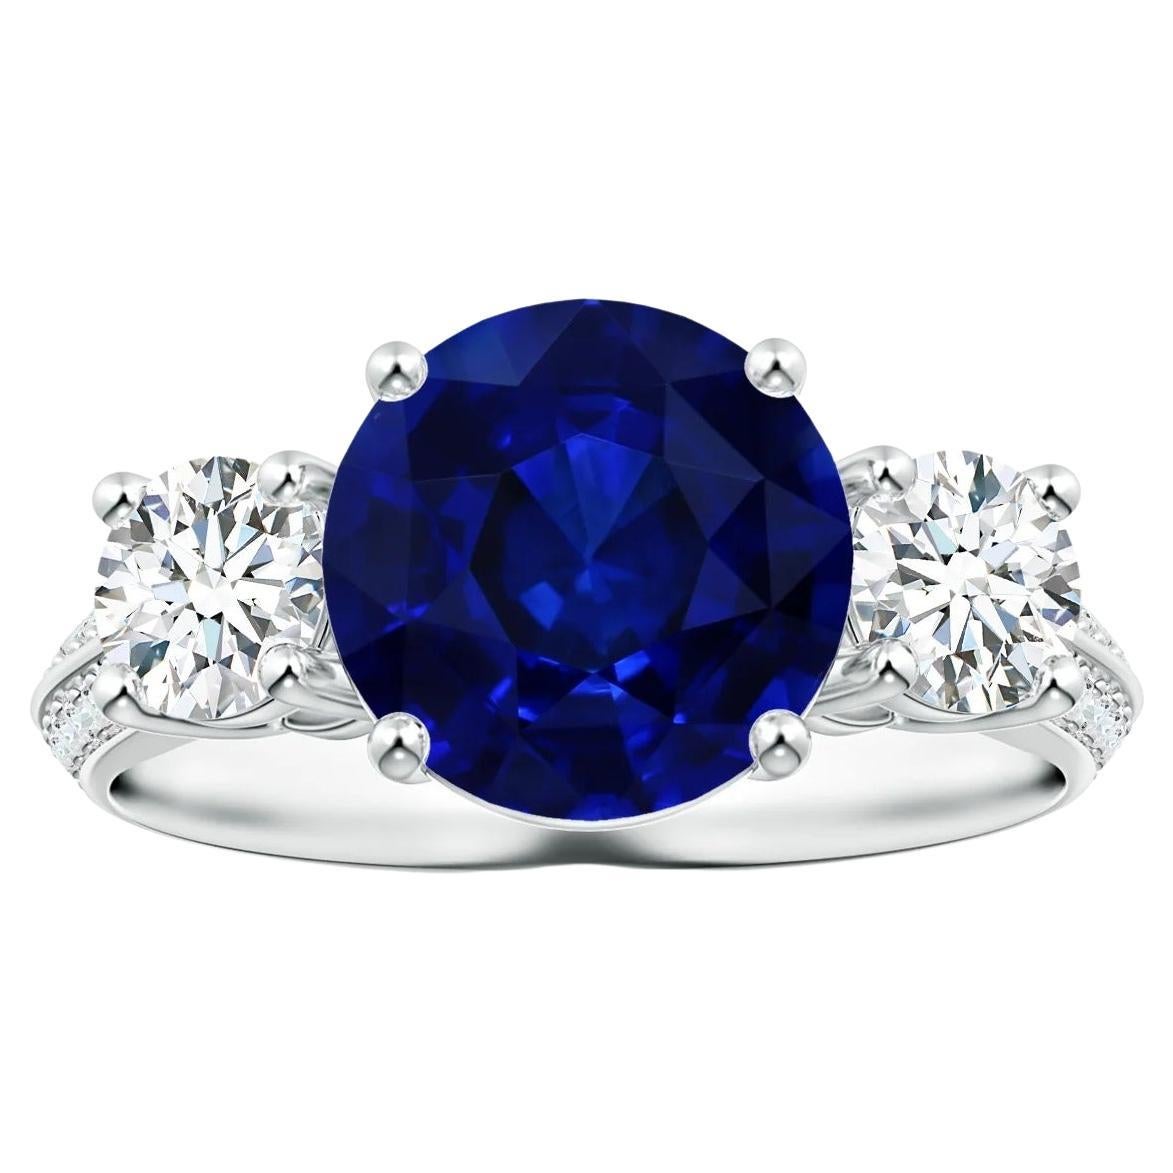 Buy PTM Natural Blue Sapphire/Neelam 3.25 Ratti or 3 Carat Astrological  Certified Gemstone/Square Shape Pure Sterling Silver/925 bis Hallmark  Adjustable Ring for Men at Amazon.in